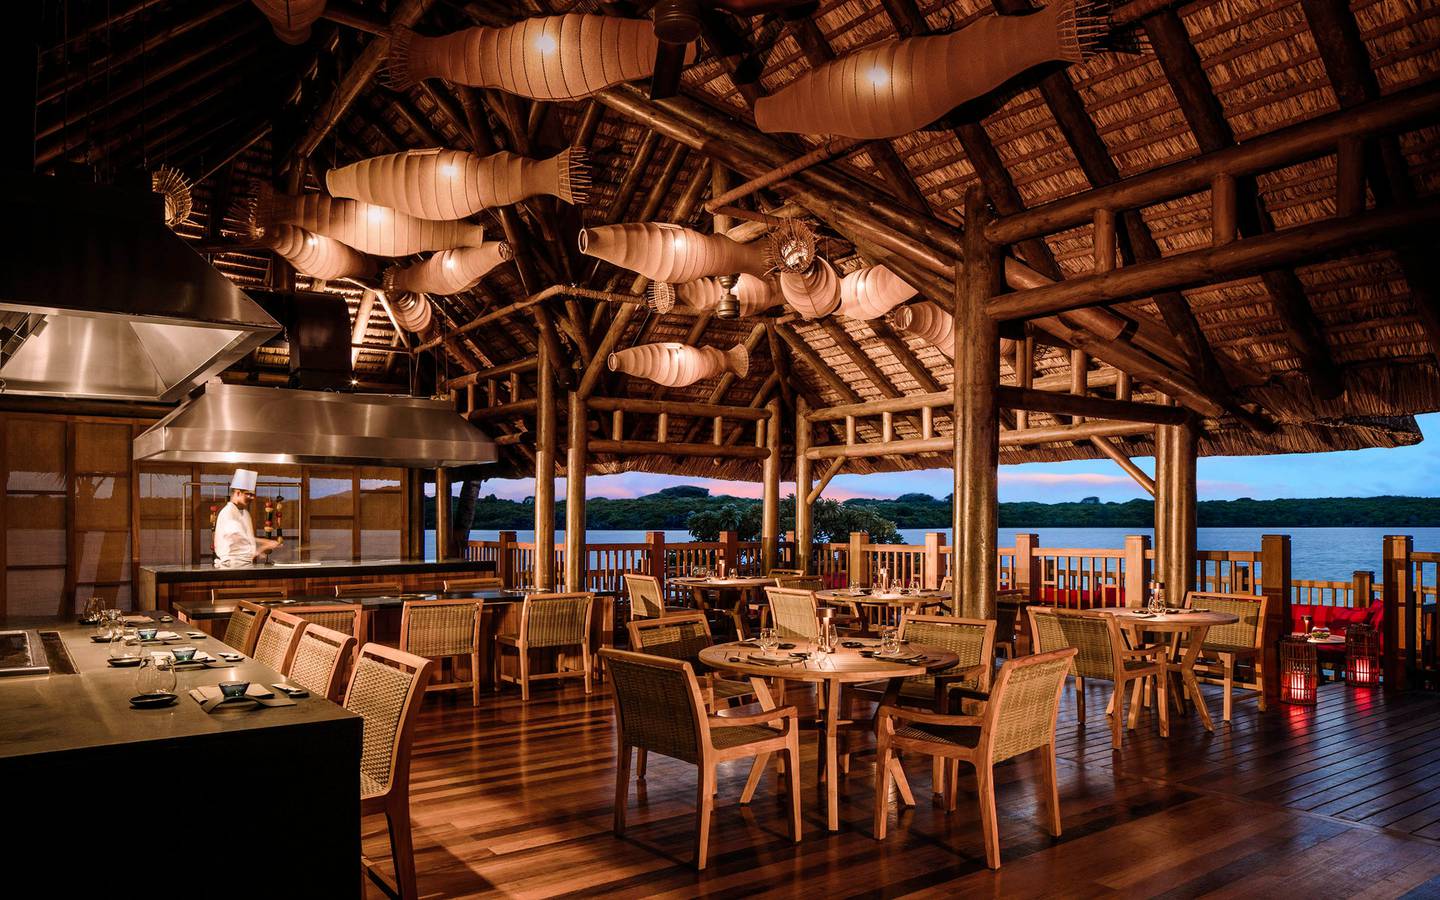 Tapasake at One&Only Le Saint Geran offers delicious tapas-style Asian eats set over a tranquil lagoon. Photo: Kerzner